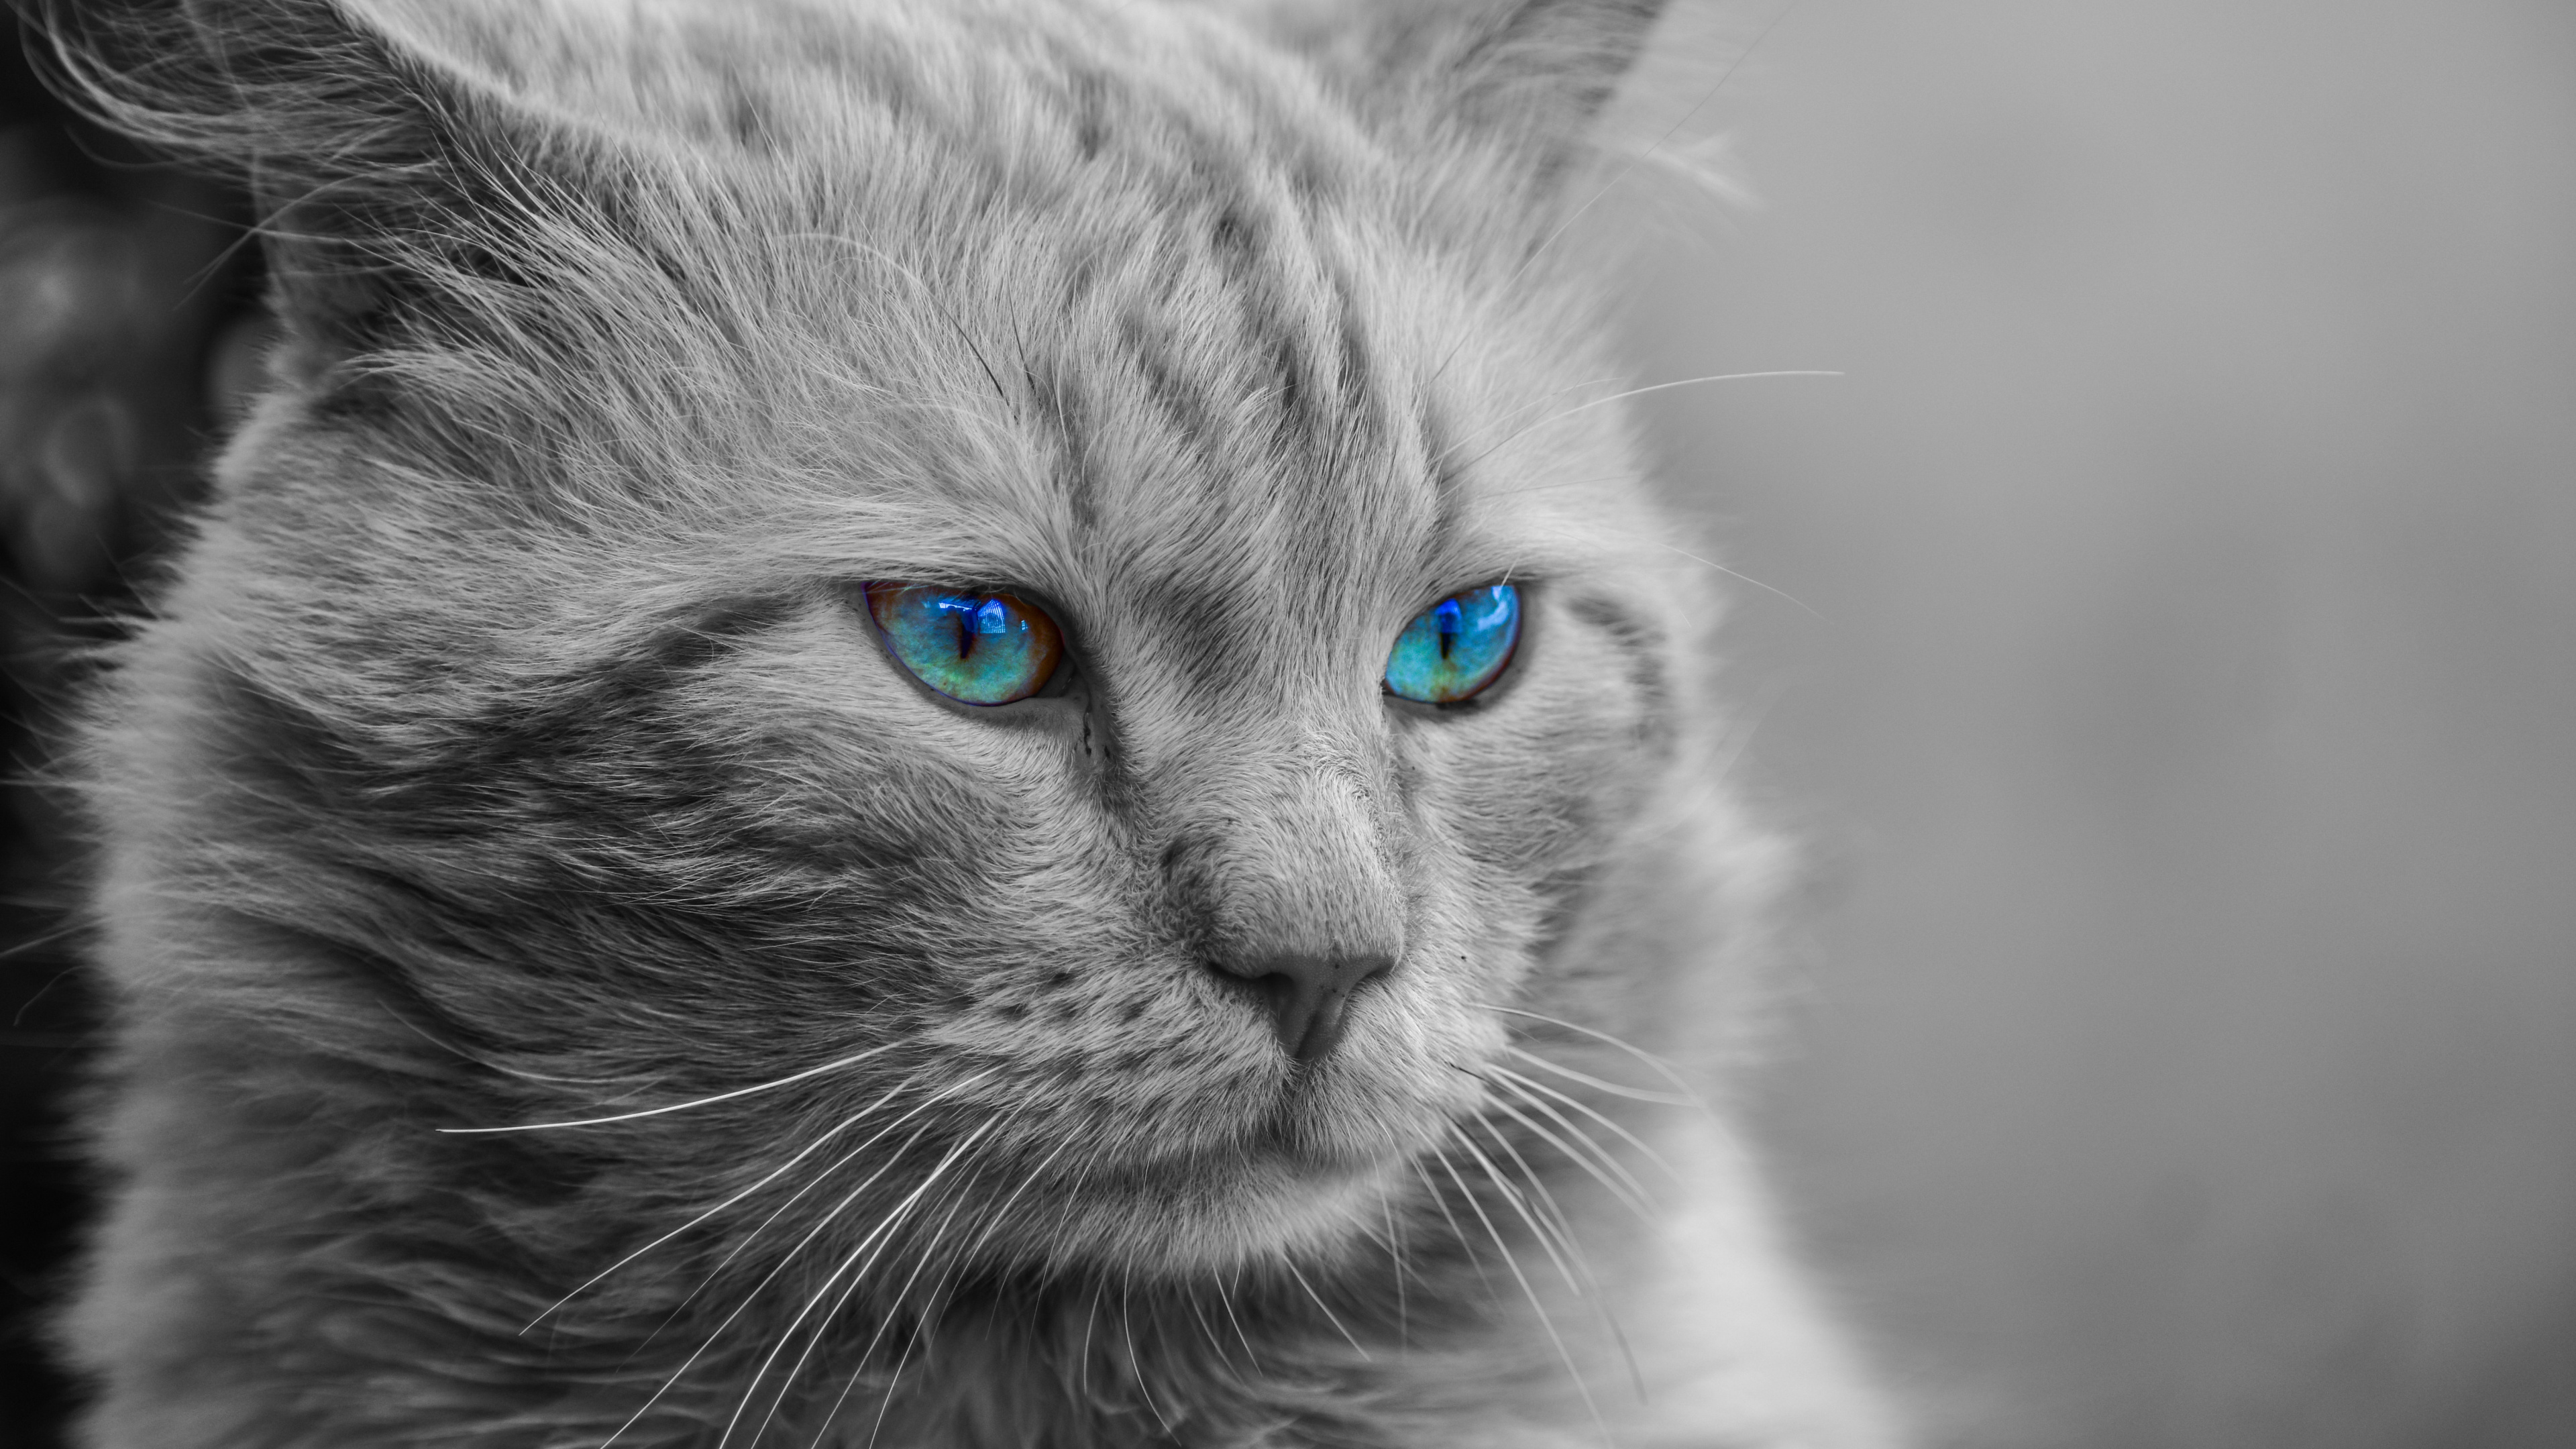 Grayscale Photo of Cat With Blue Eyes. Wallpaper in 3840x2160 Resolution